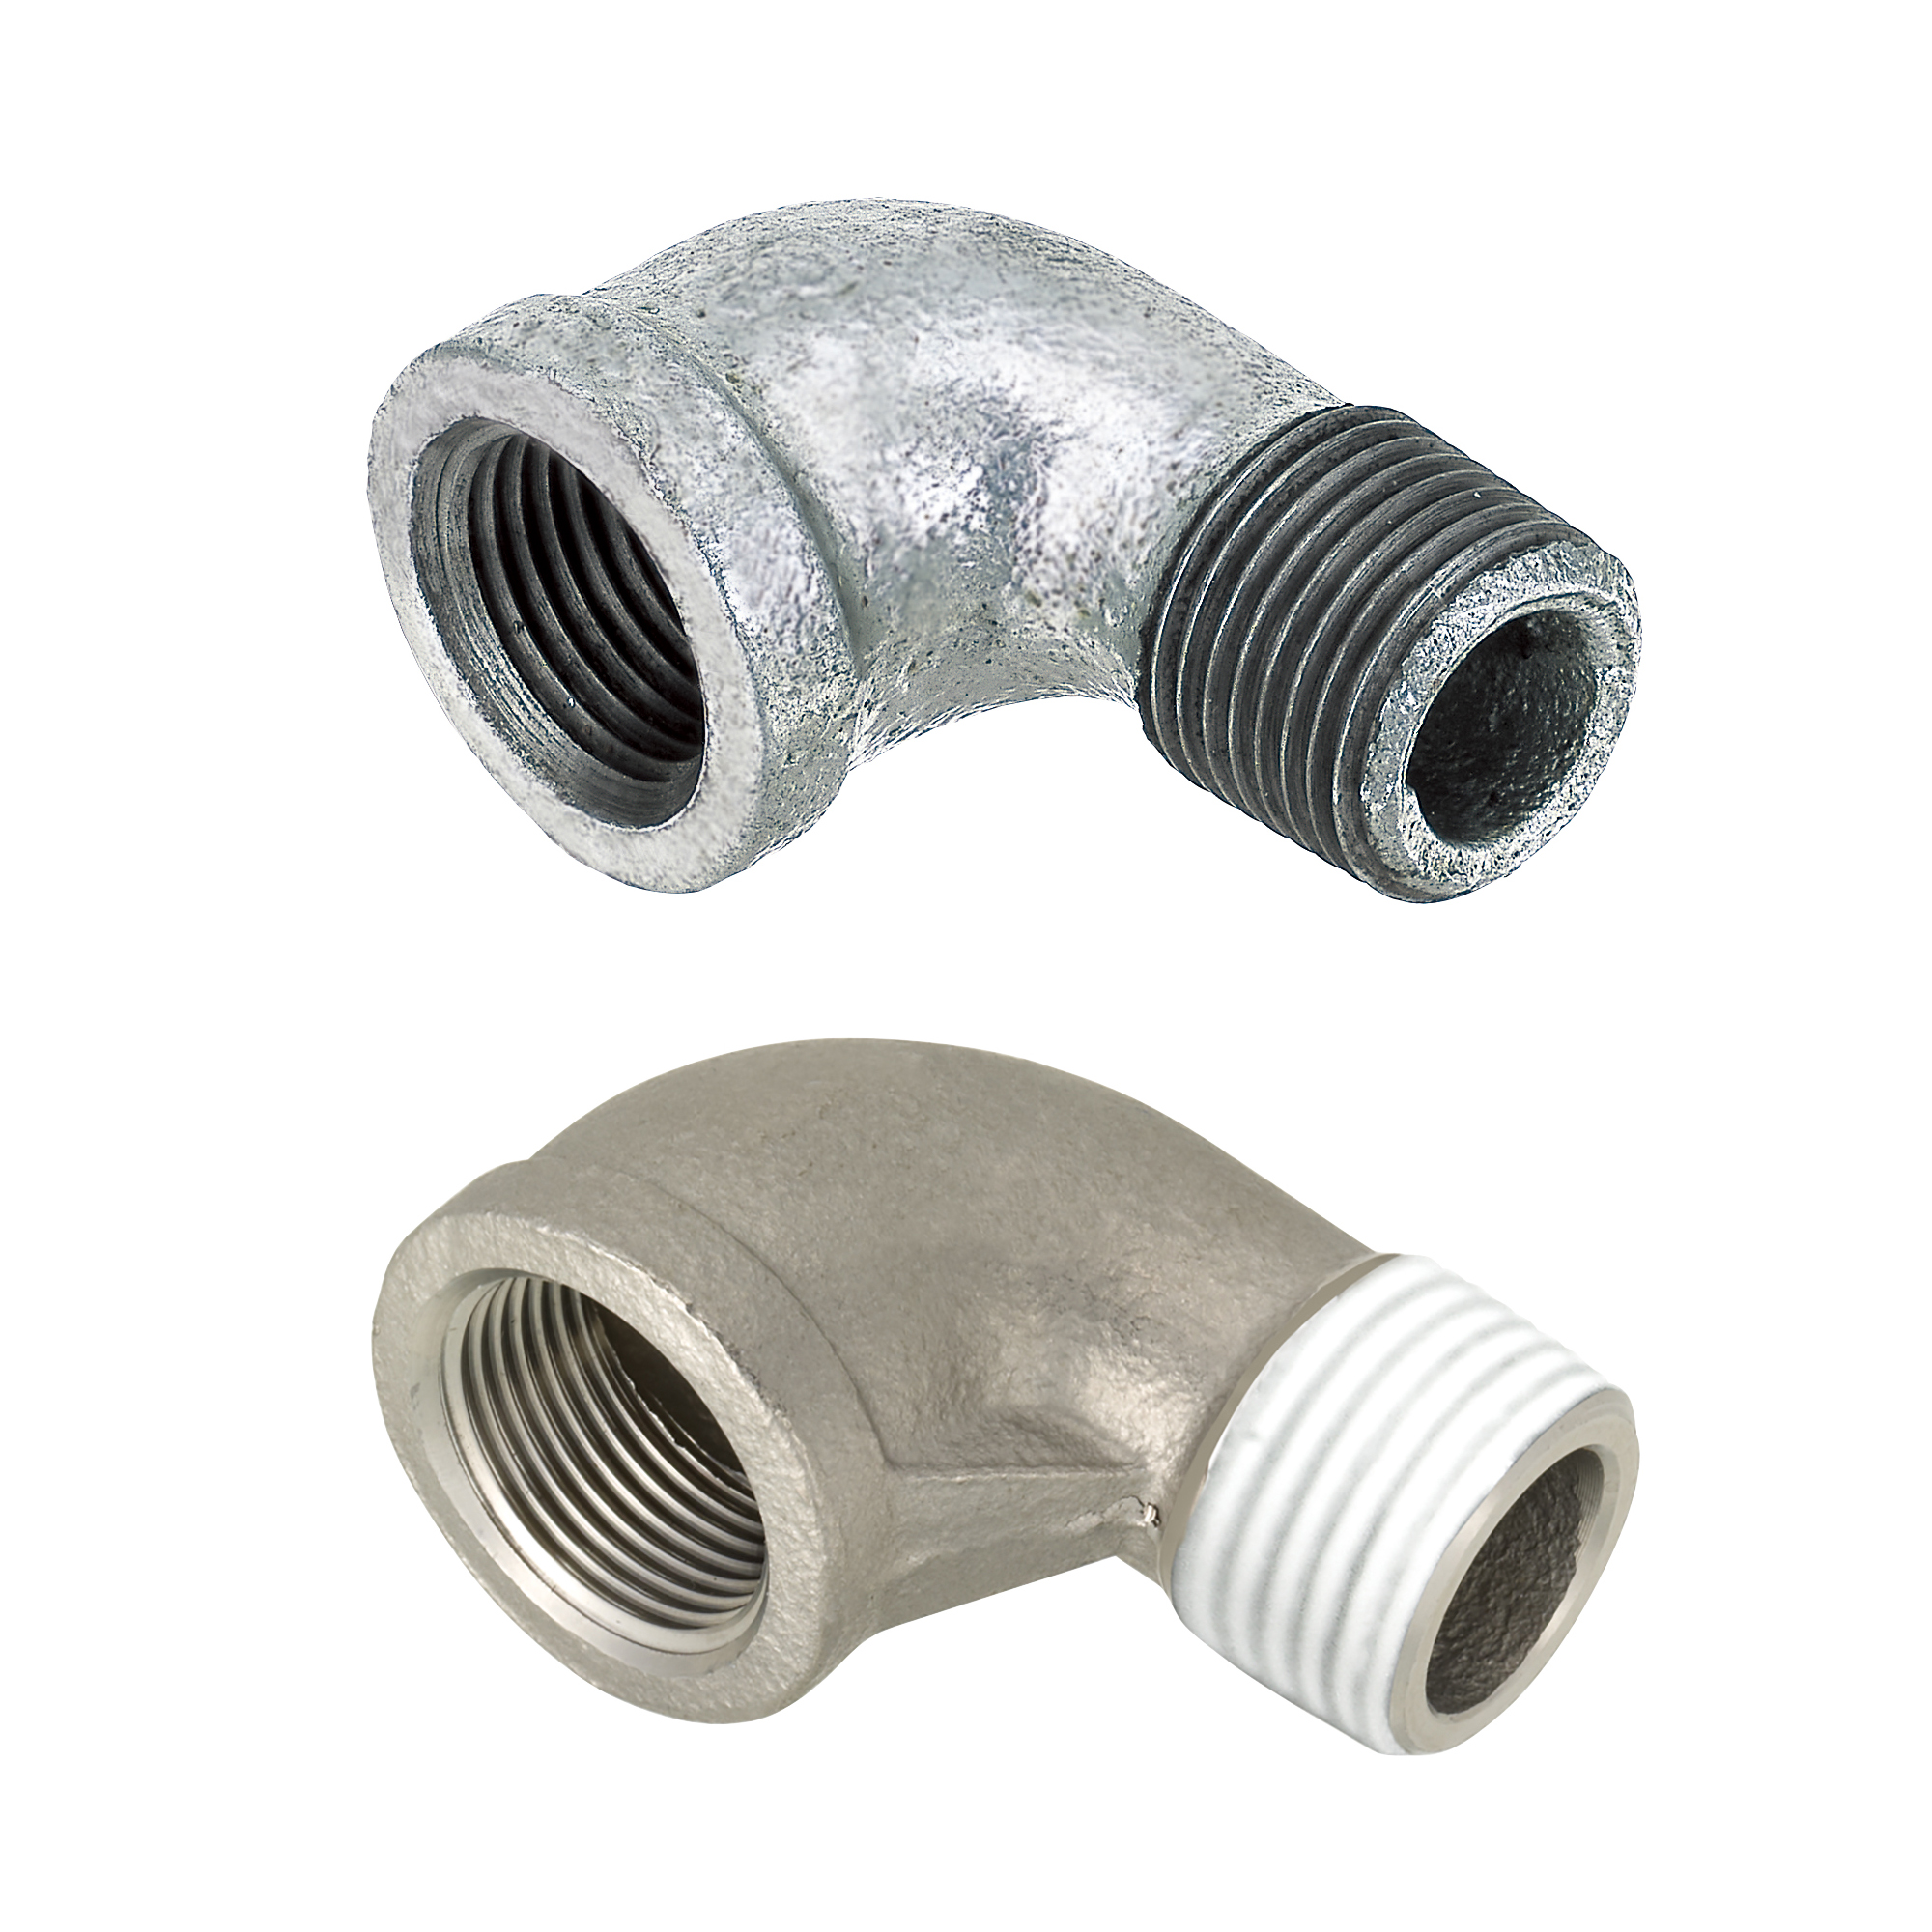 Low Pressure Fittings/90 Deg. Elbow/Threaded and Tapped (SGPPEL50A) 